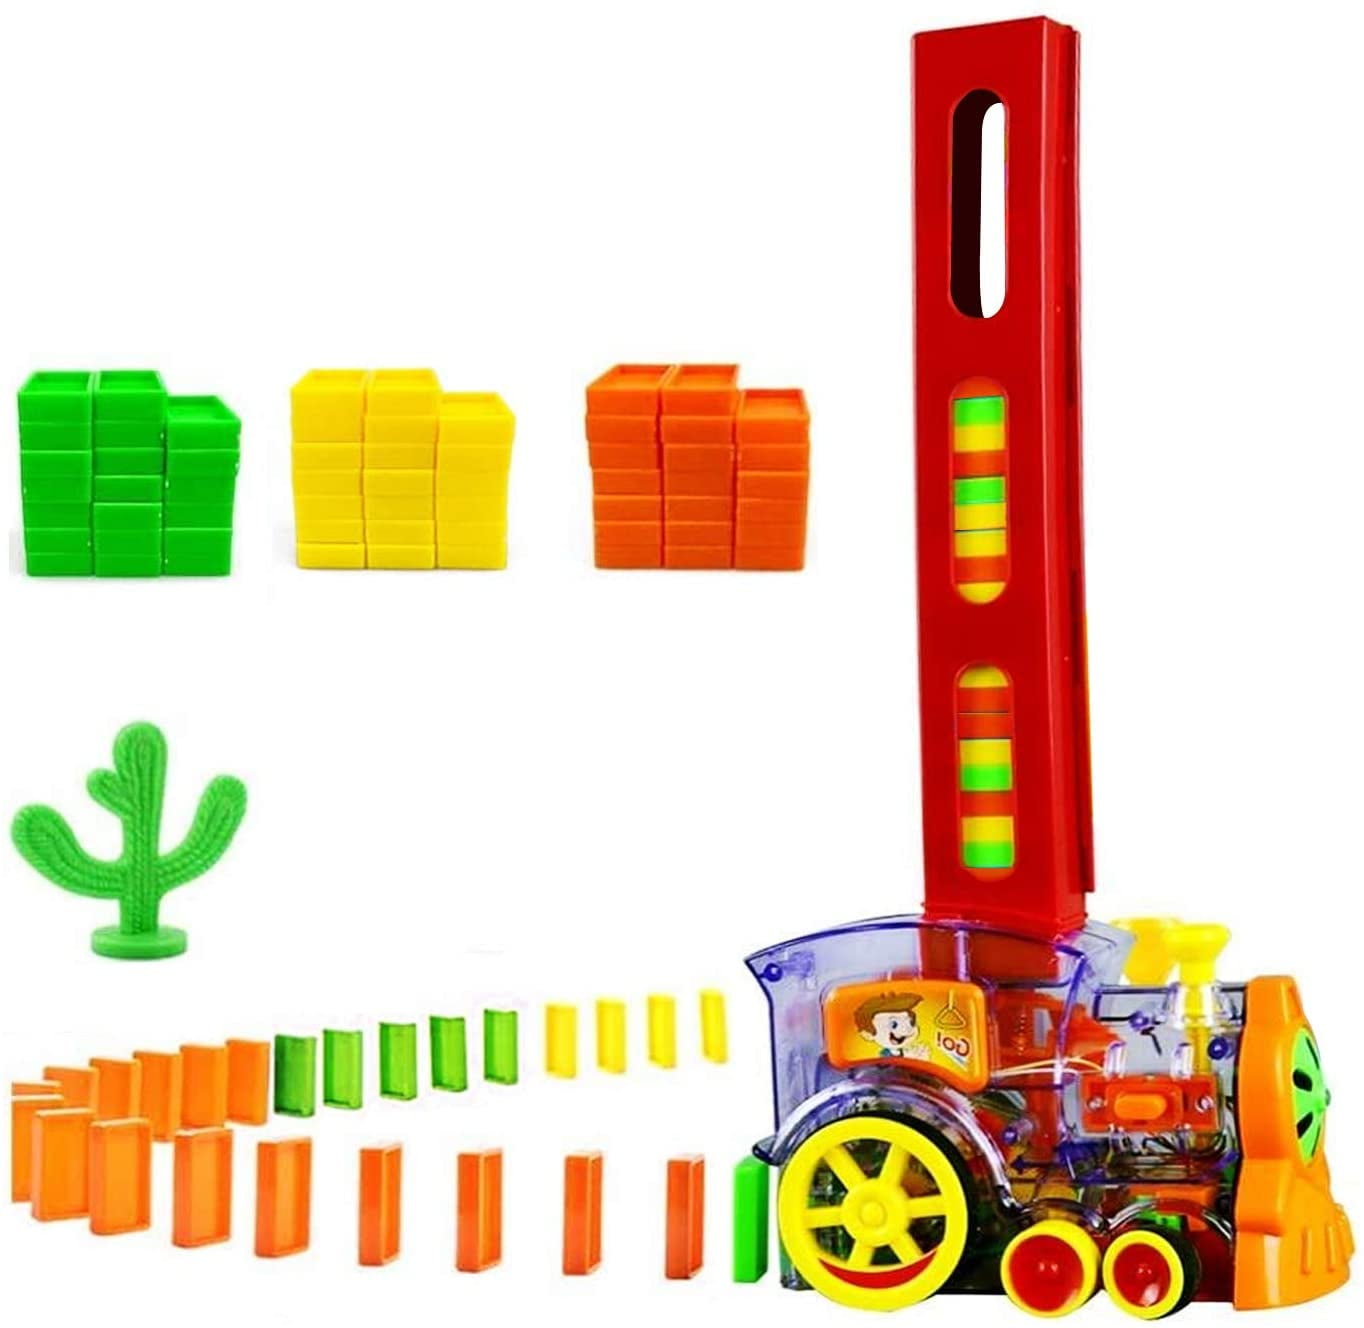 Domino Rally Electronic Train Model Kids Colorful Toy Set W/ Sound Toys Gifts 